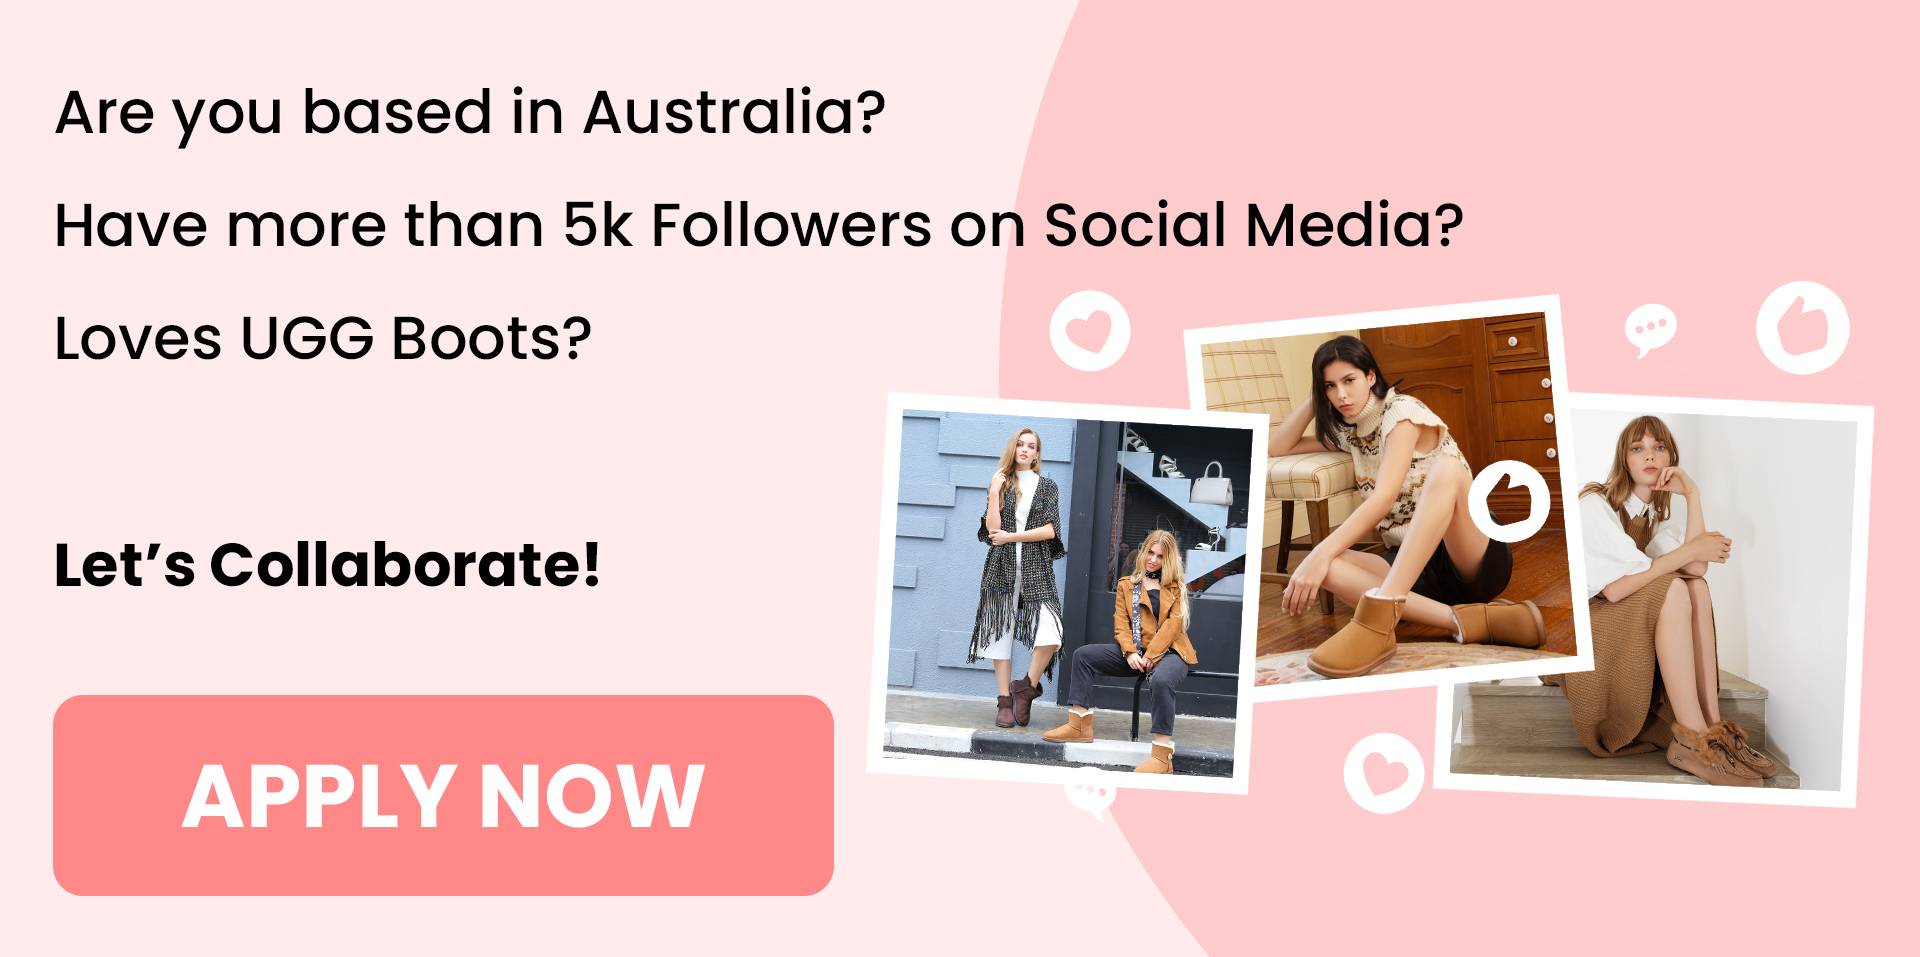 Are you based in Australia? Have more than 5k Followers on Social Media? Loves UGG Boots? Let's Collaborate! APPLY NOW 